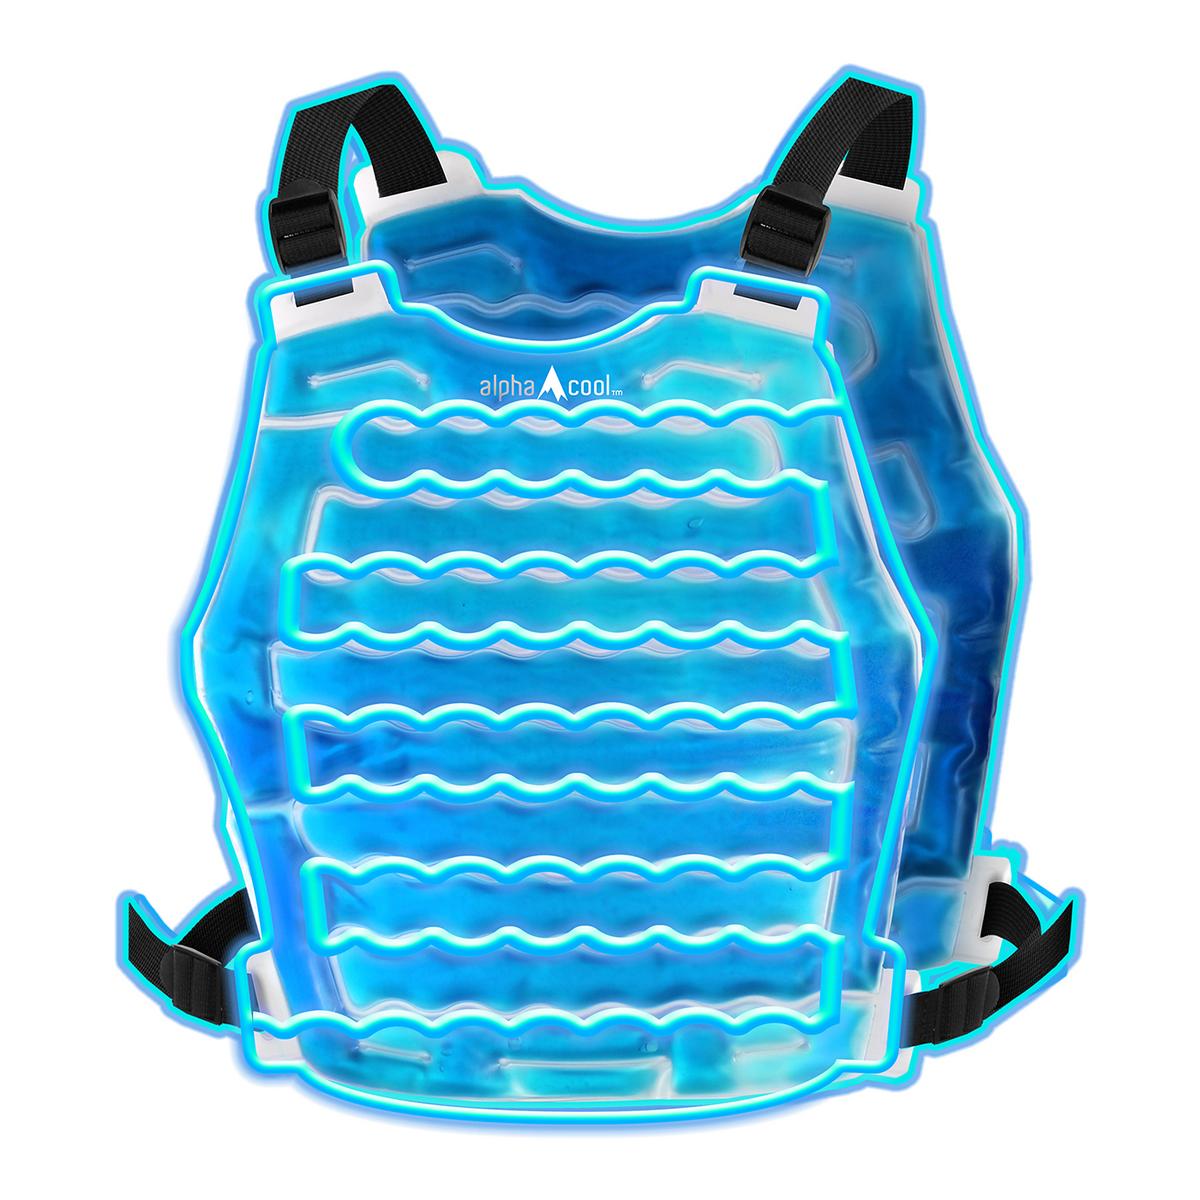 AlphaCool Original Cooling Ice Vest - Heated